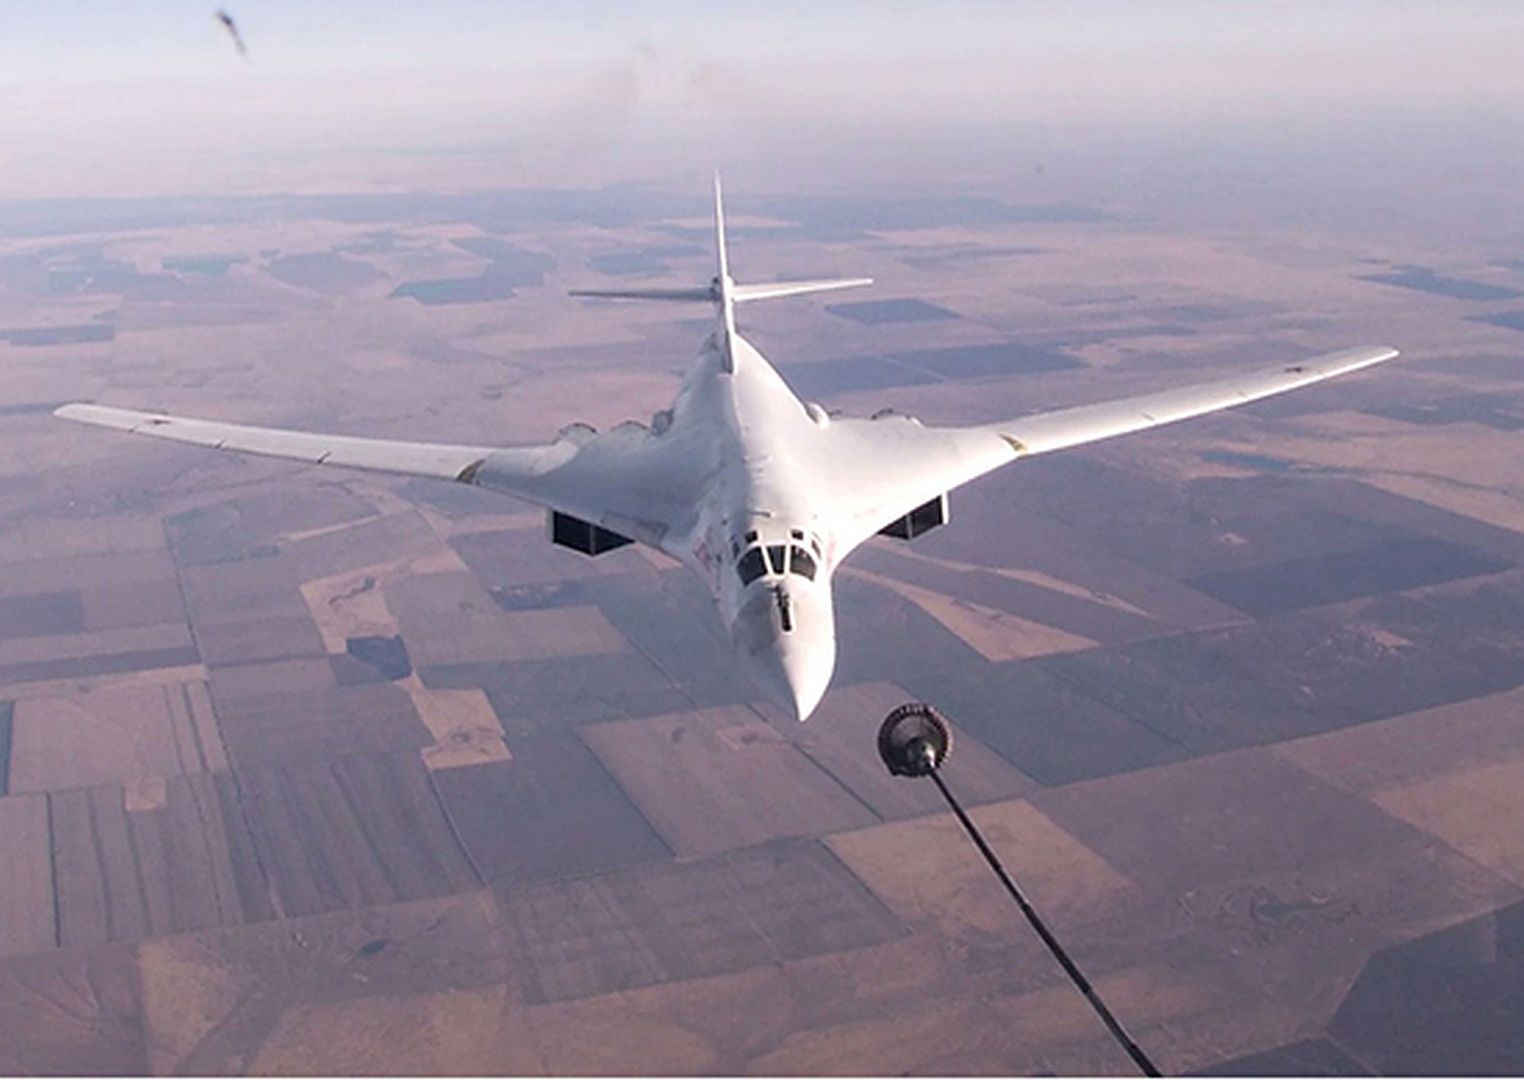 Tu 160 And Il 78 Long Range Aircraft Have Completed Long Flights With Air To Air Refuelling